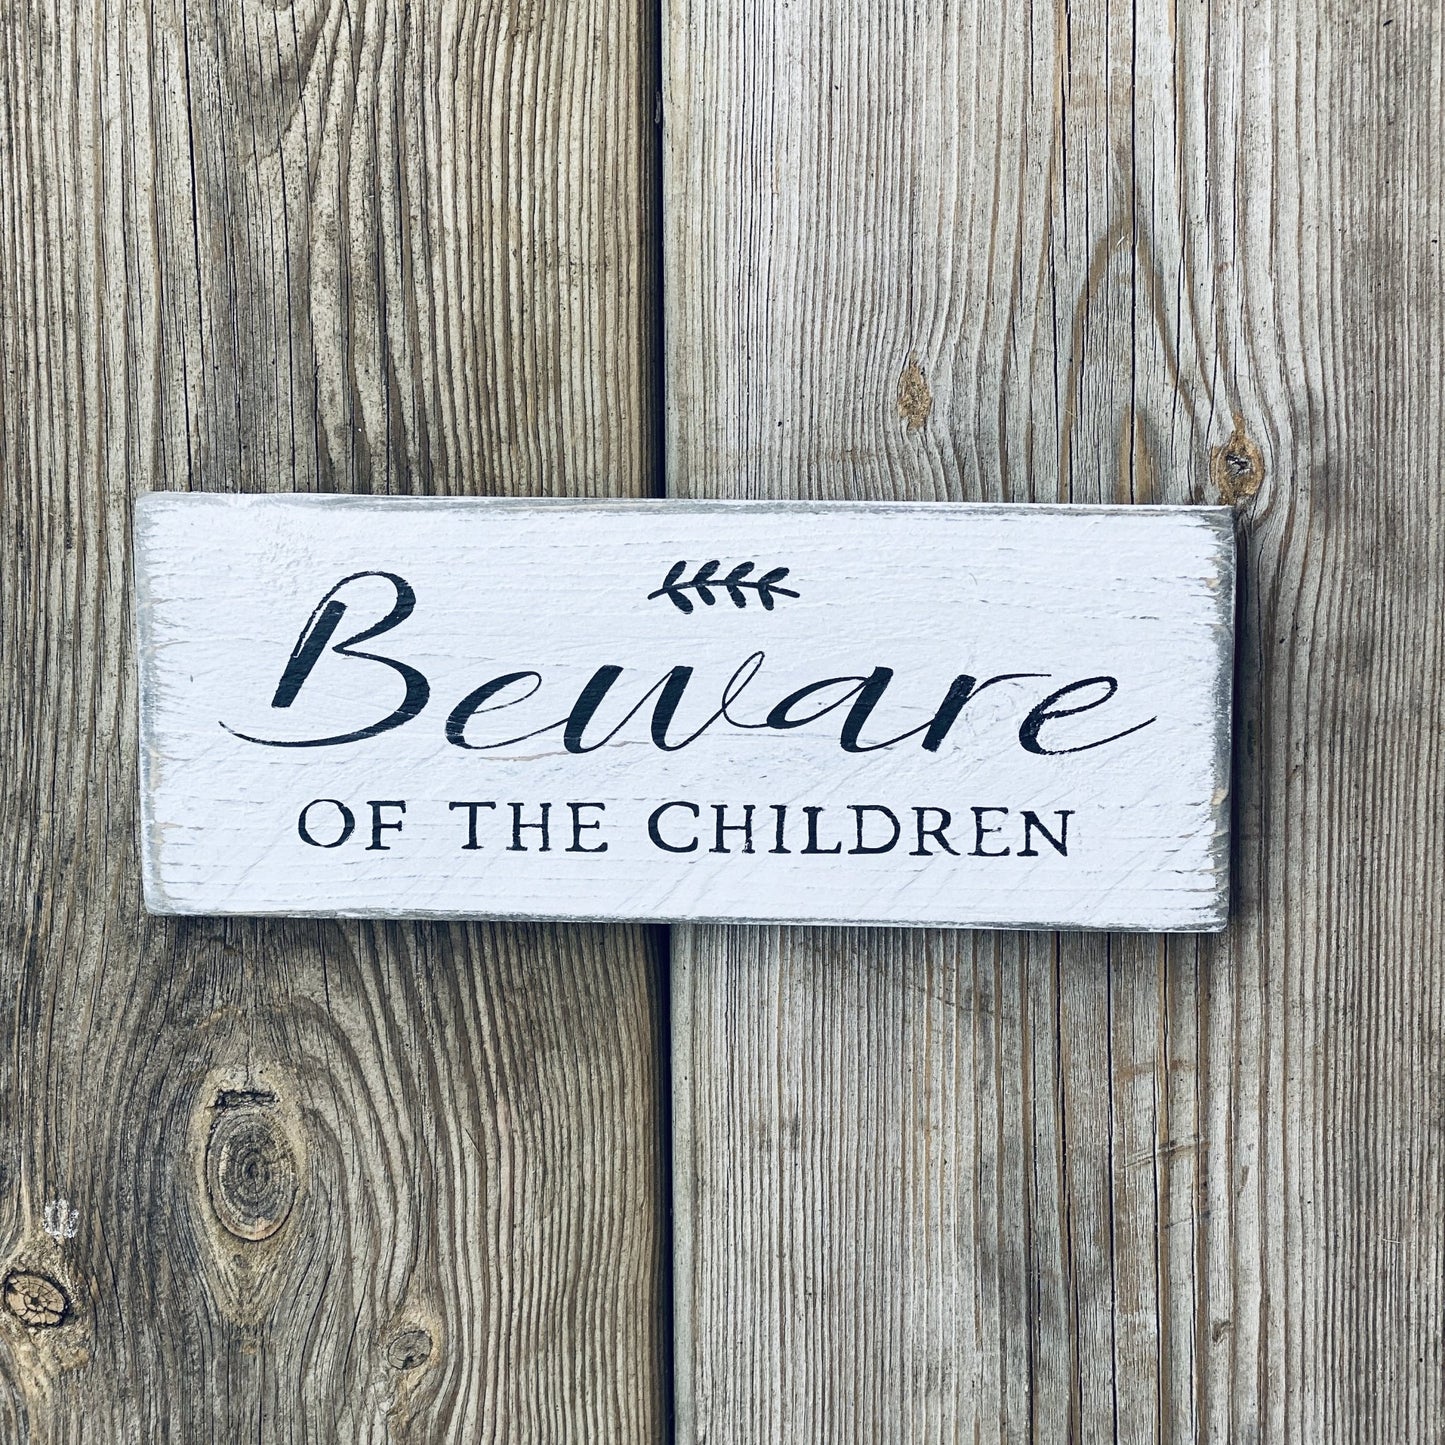 Beware of the Children | Reclaimed Wood Sign - The Imperfect Wood Company - Hanging Wood Sign